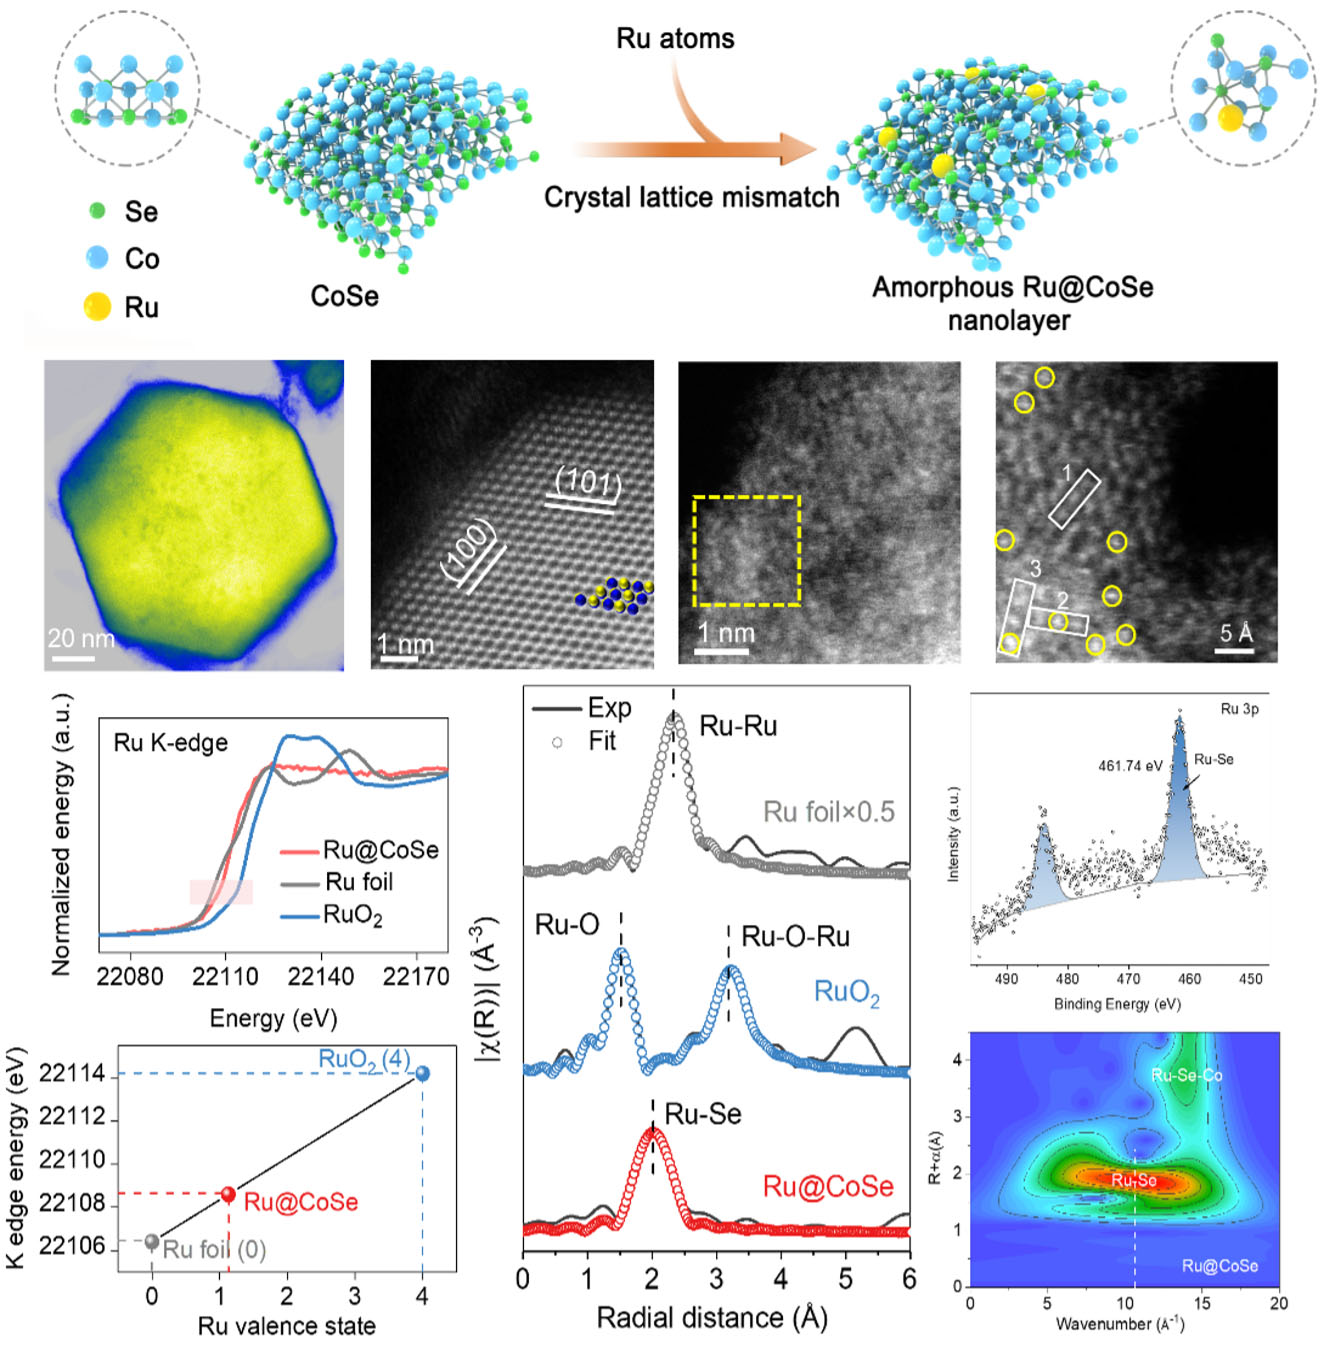 The structural characterization of Ru@CoSe biocatalyst with amorphous nanolayer